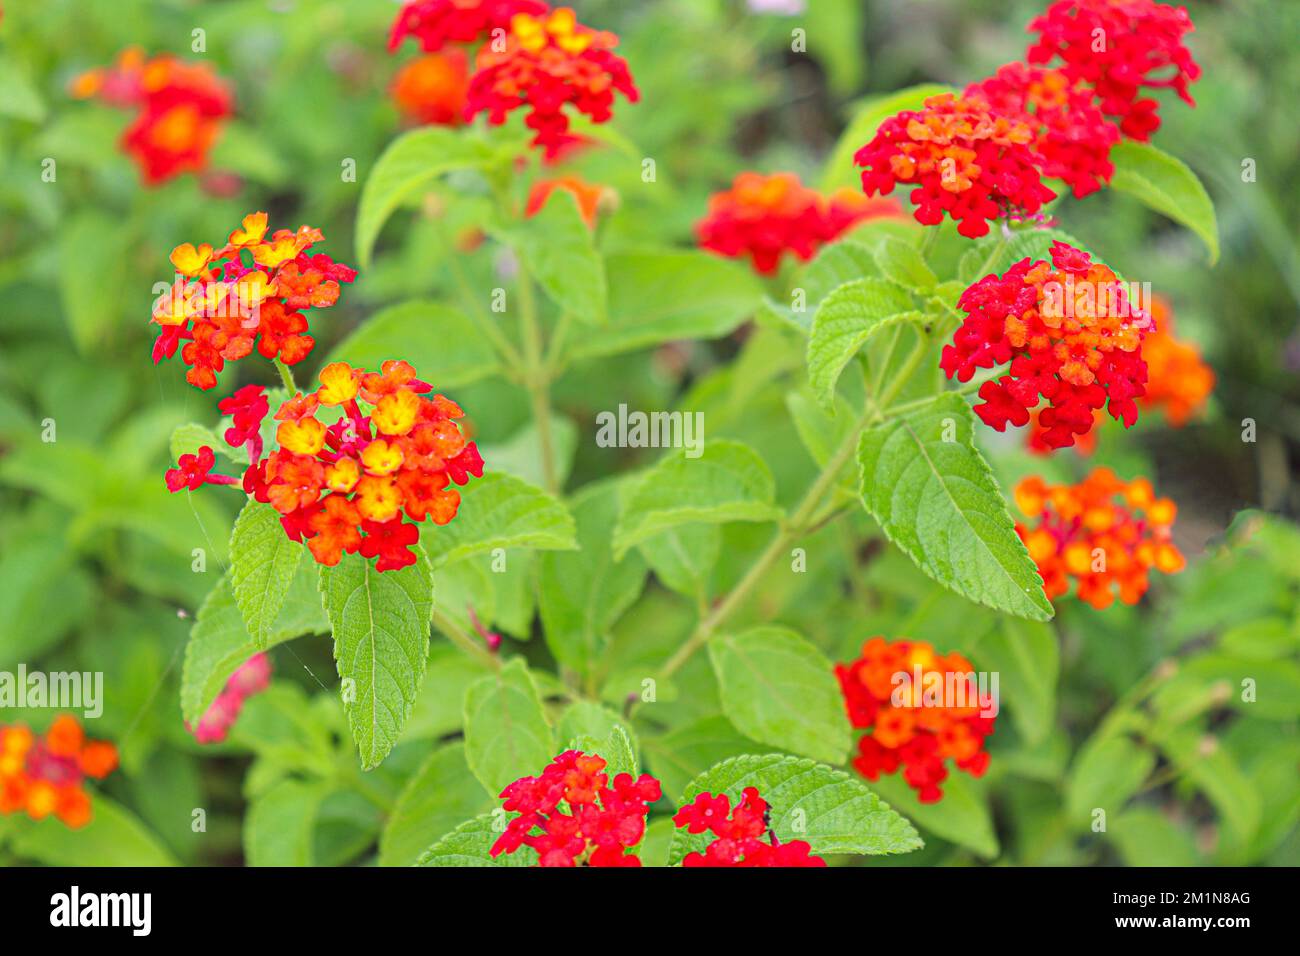 red colored lantana flower on tree in garden Stock Photo